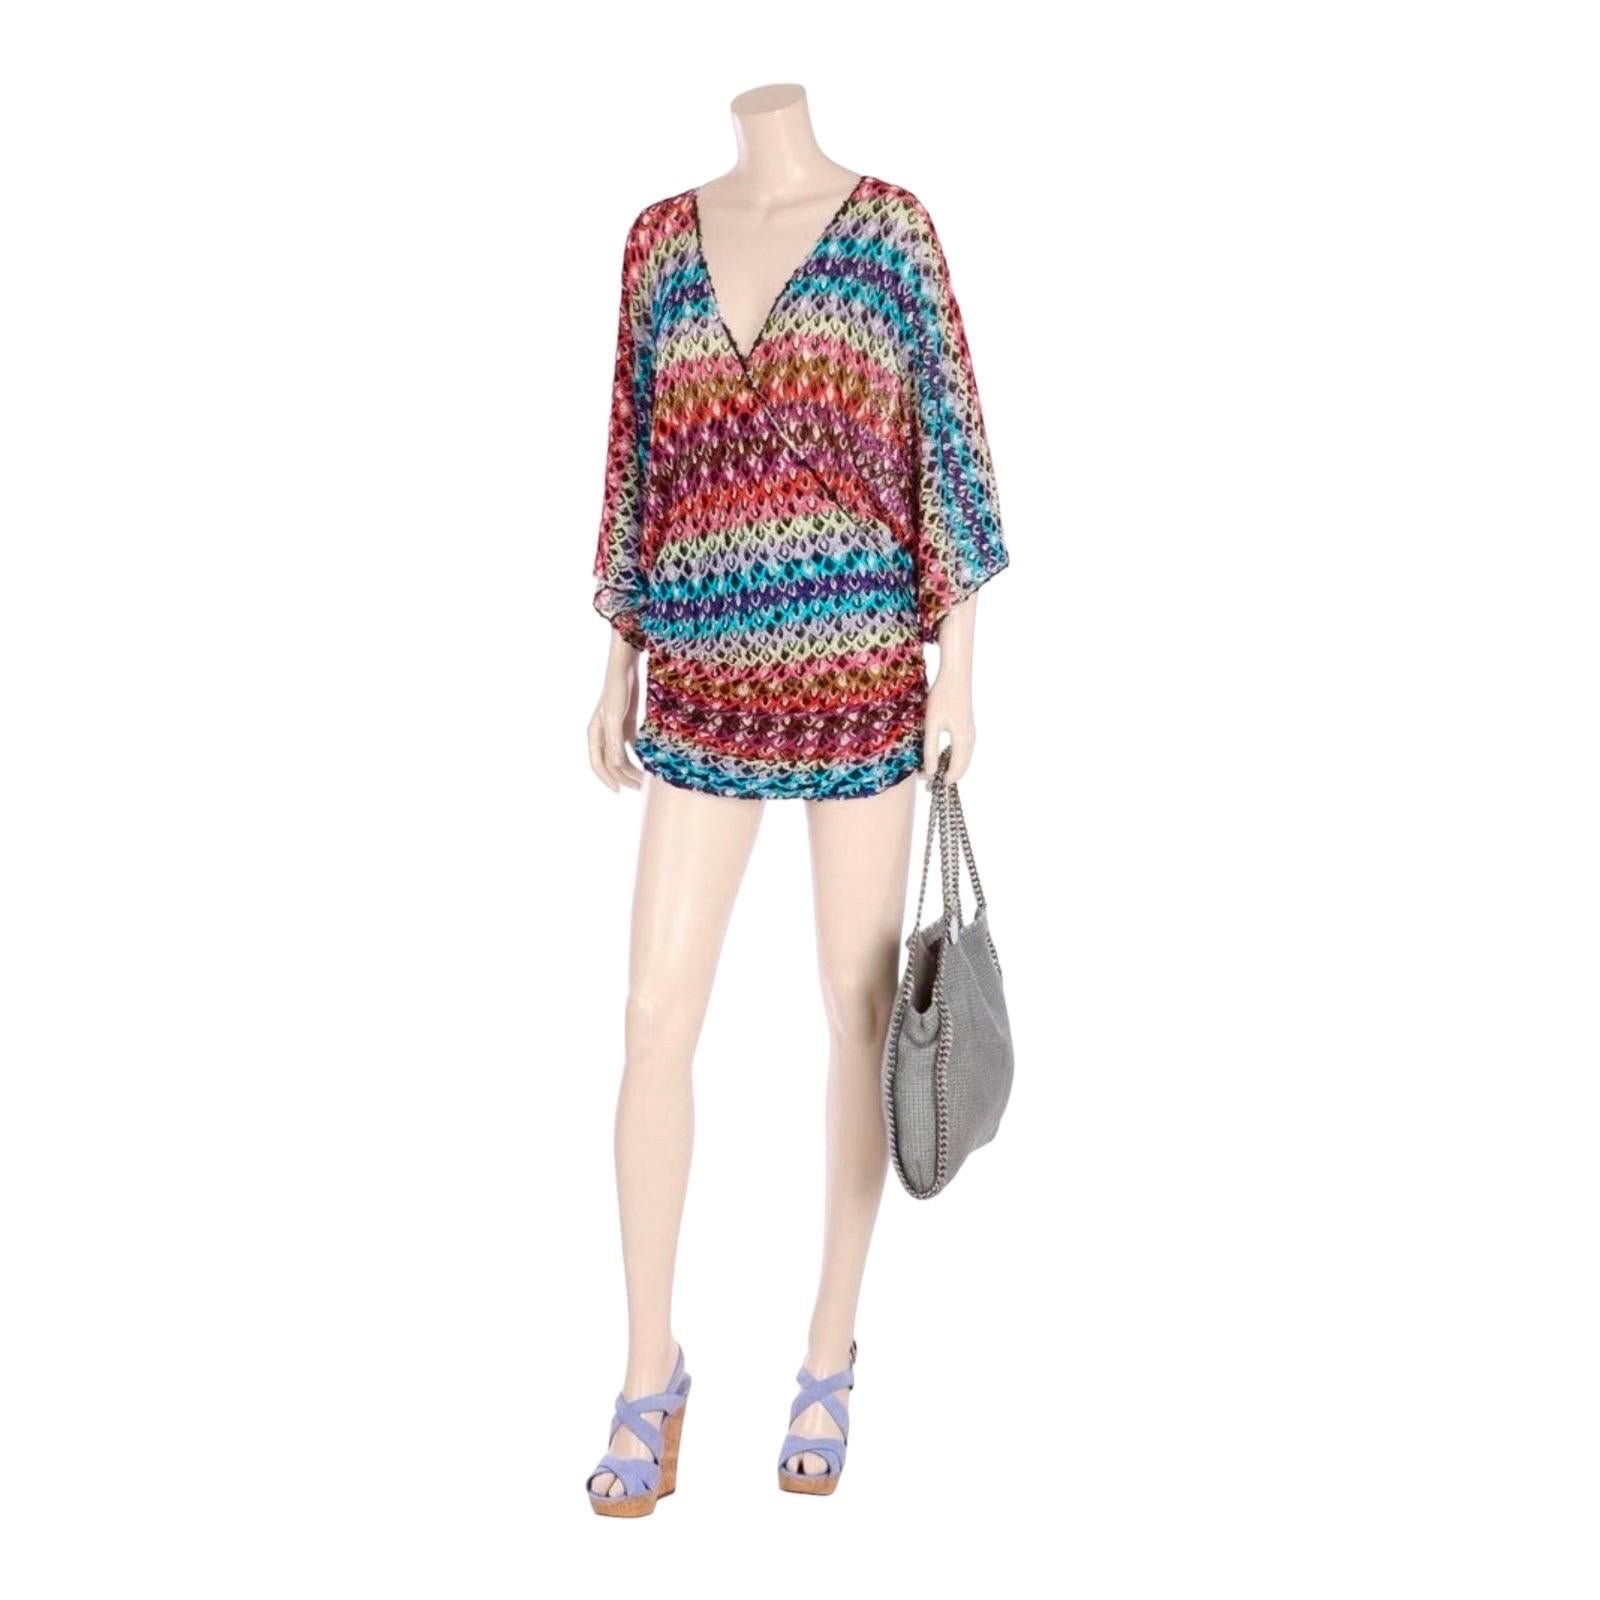 A Missoni signature piece in stunning colors
Stunning, rare piece - hard to find!
Multicolored crochet-knit
Deep V-neck
Wrap style
Batwing sleeves
Simply slips on
Made in Italy 
Dry Clean Only
Size 40